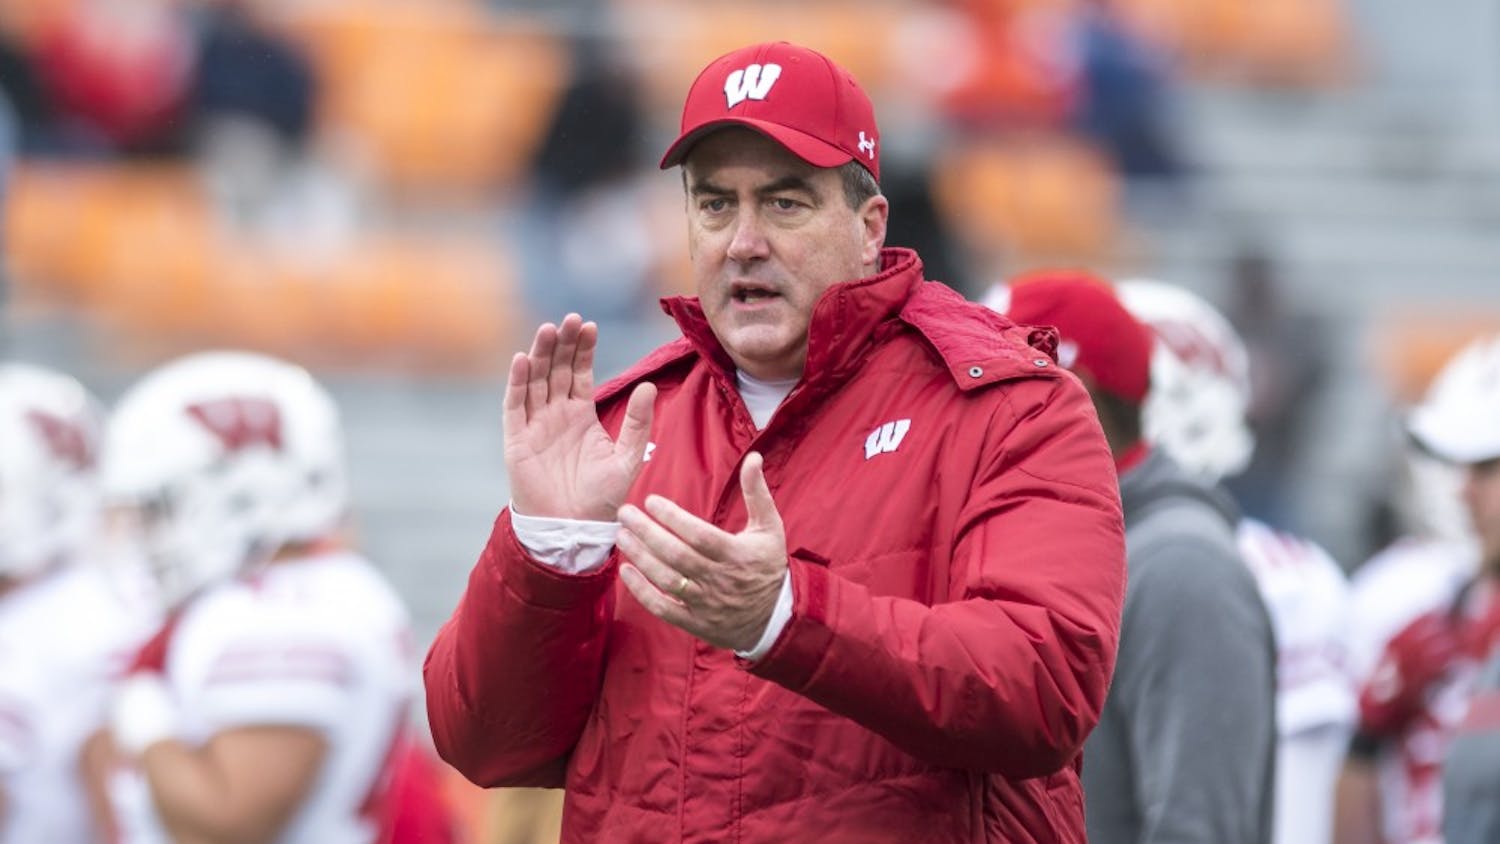 Coach Chryst is one of the twelve members of Wisconsin football to test positive for COVID-19